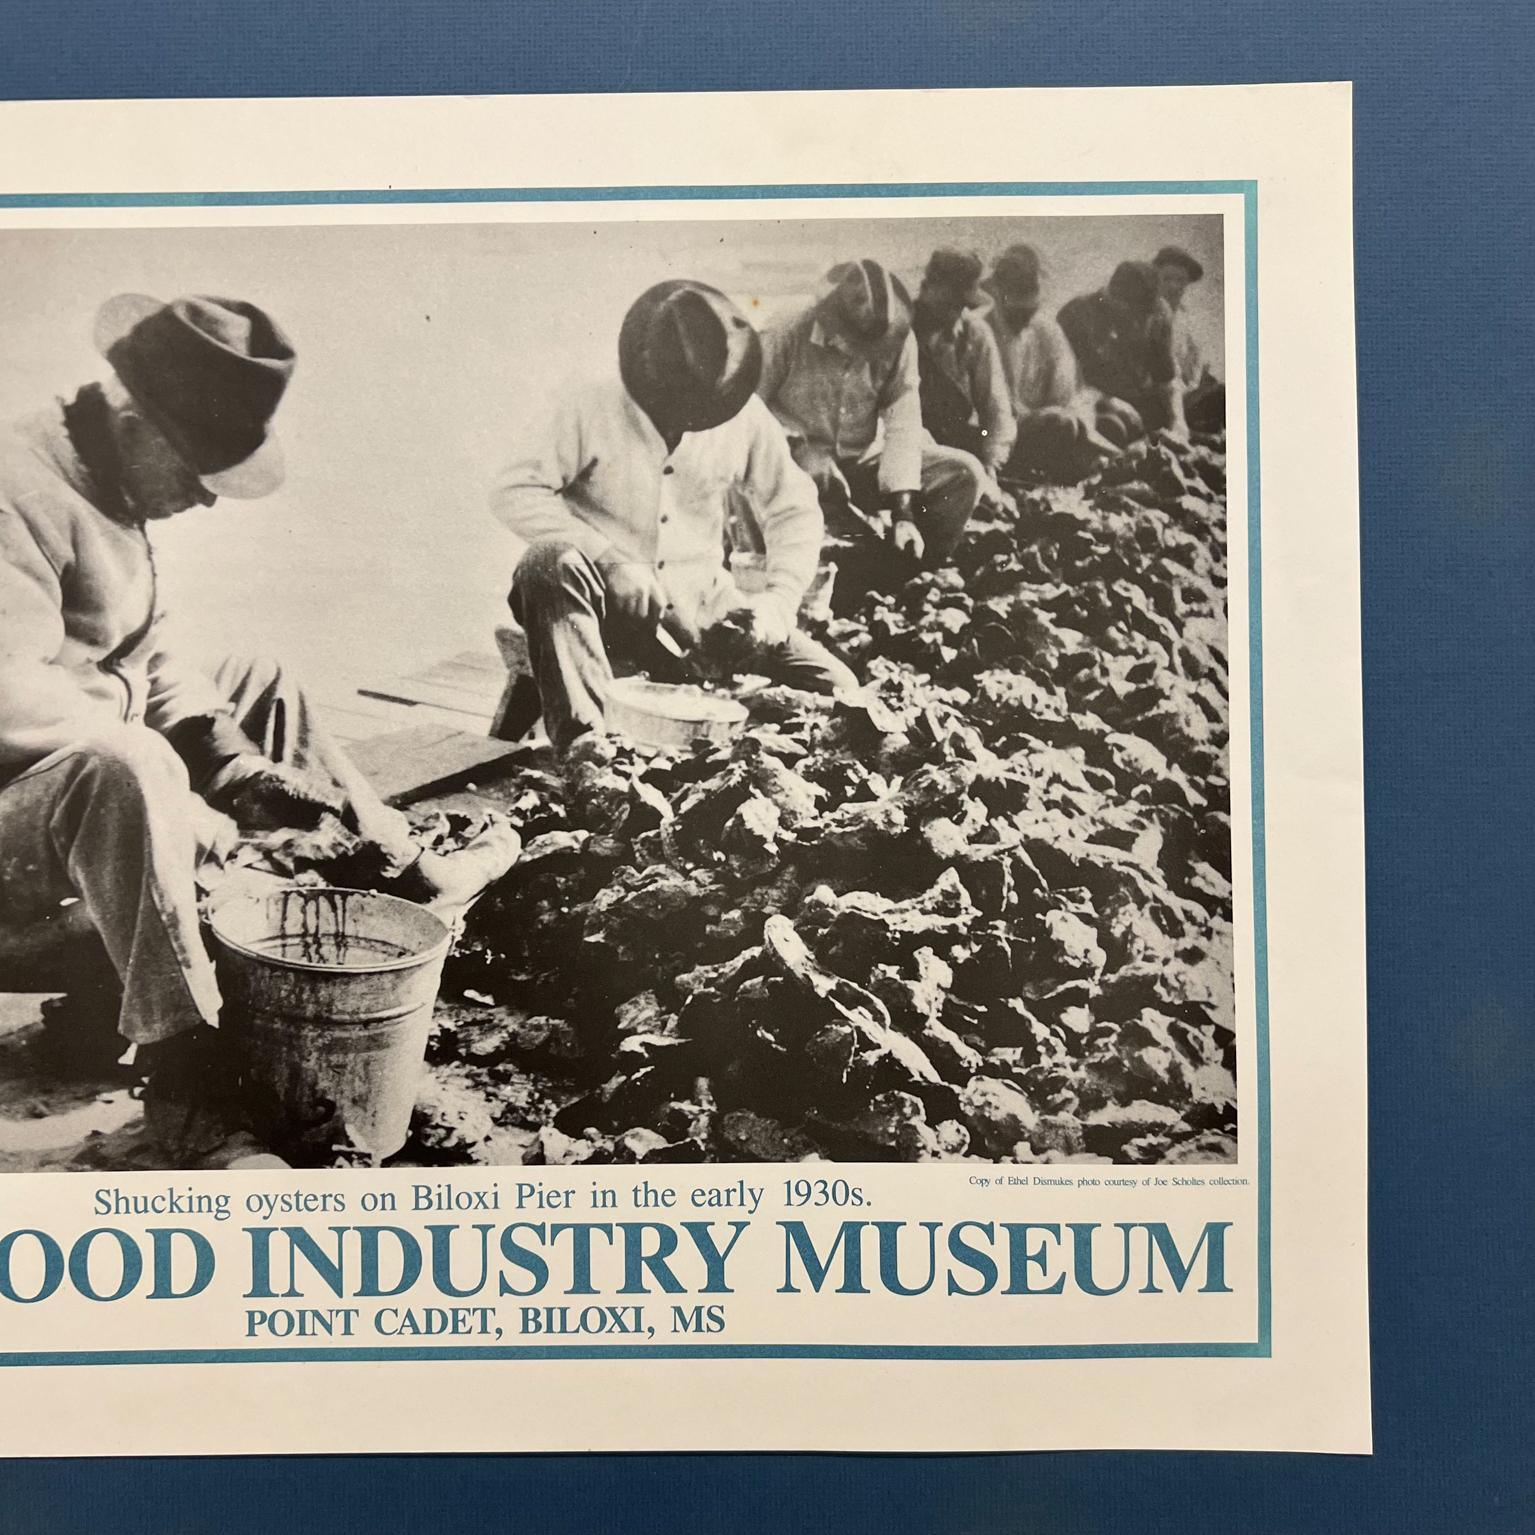 Mid-Century Modern 1930s Seafood Industry Museum Poster Art Shucking Oysters Biloxi Pier MS For Sale